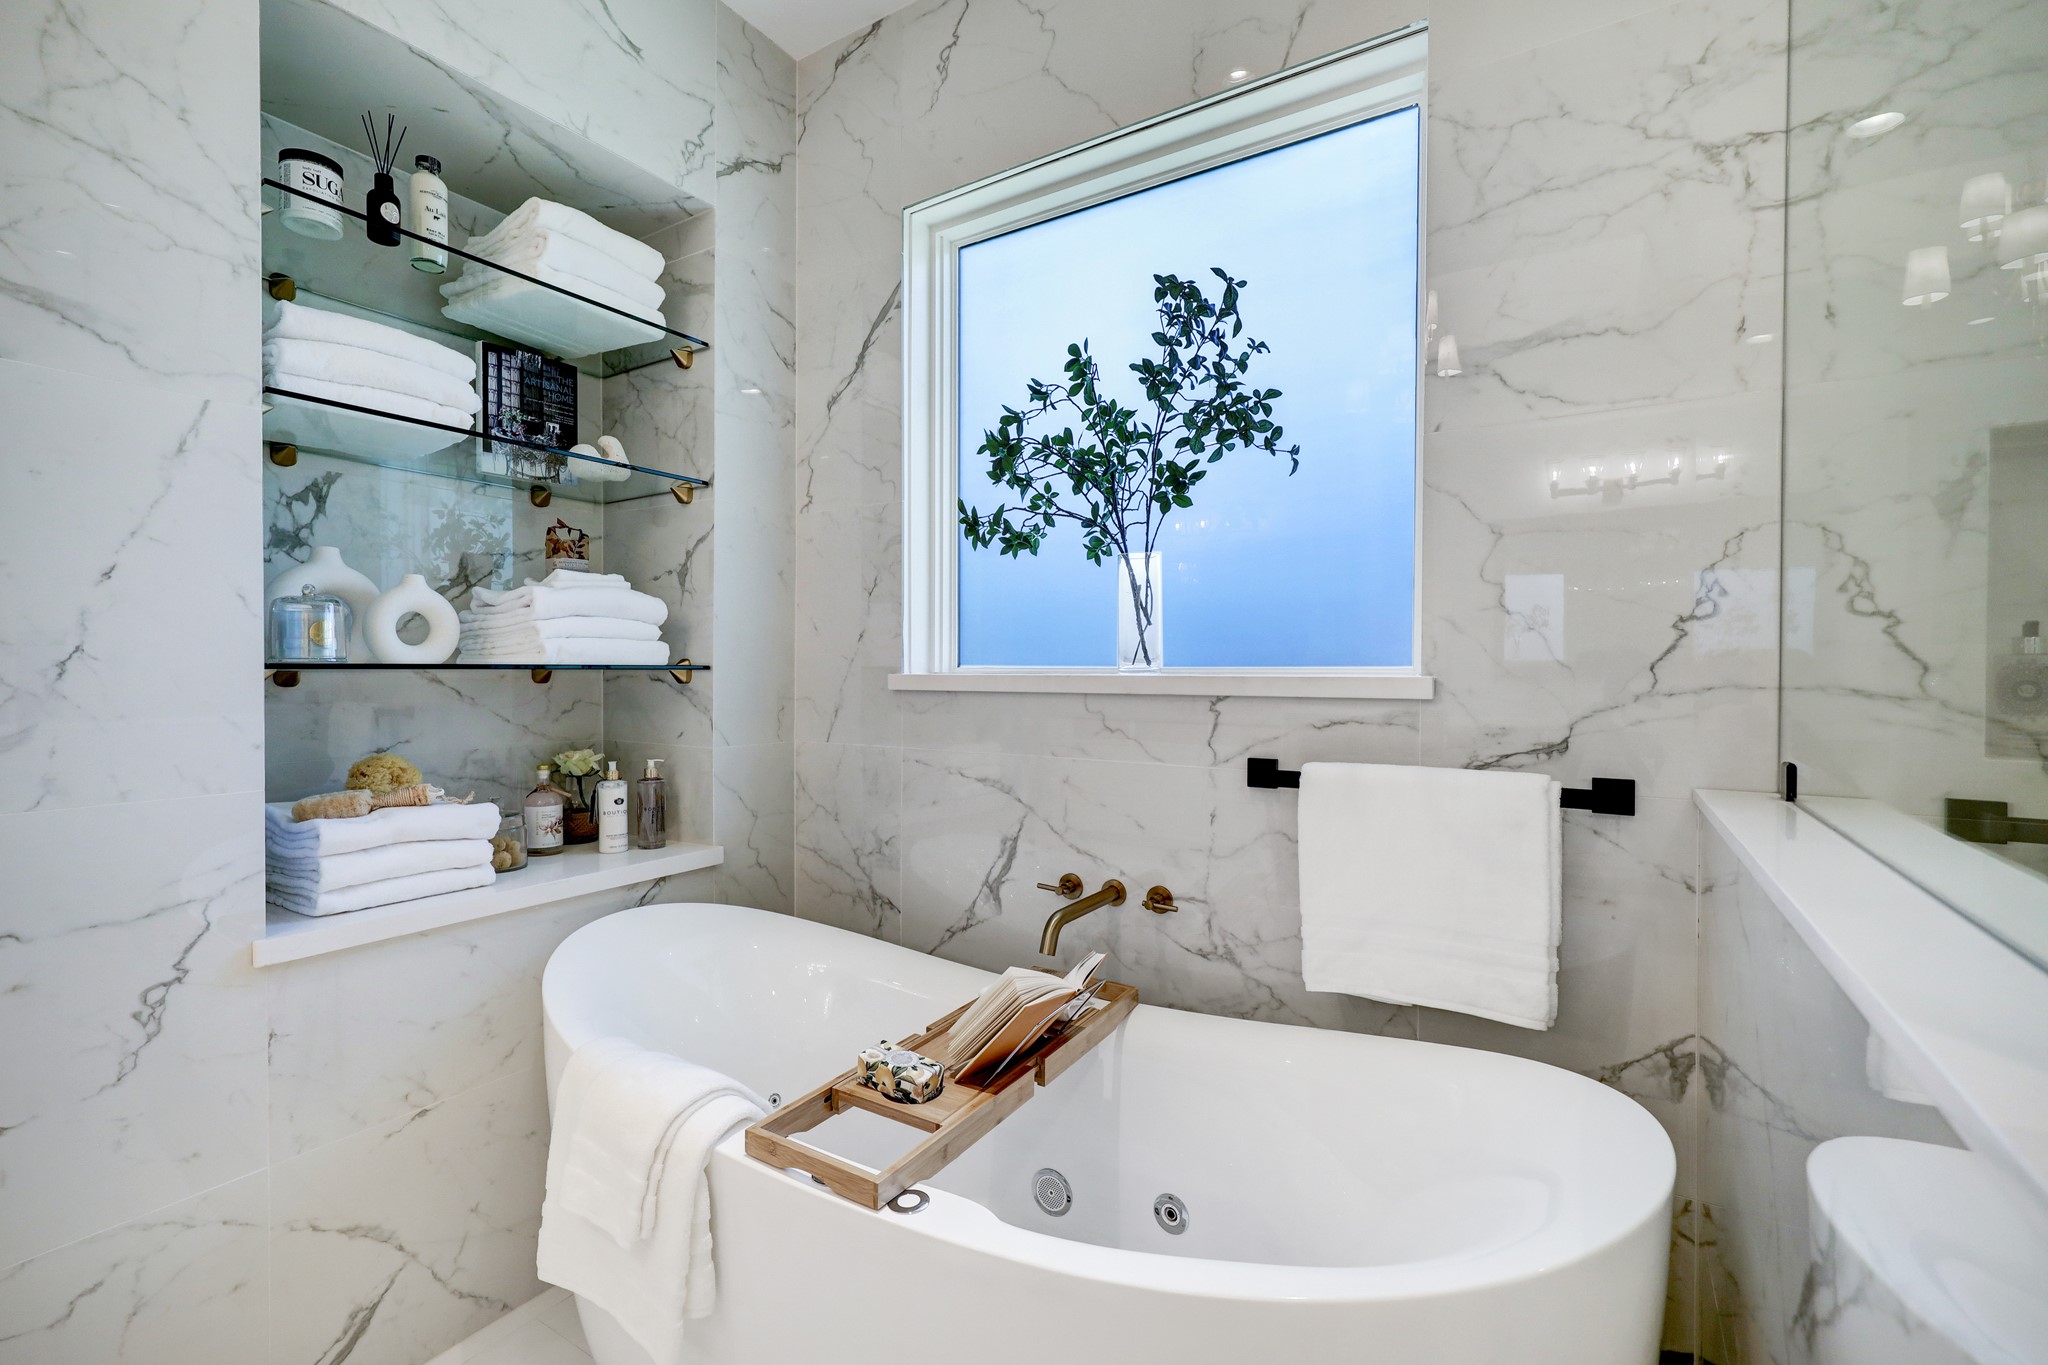 Soak the worries away and enjoy a hot bath (two tankless hot water heaters!!) in the jetted soaking tub.